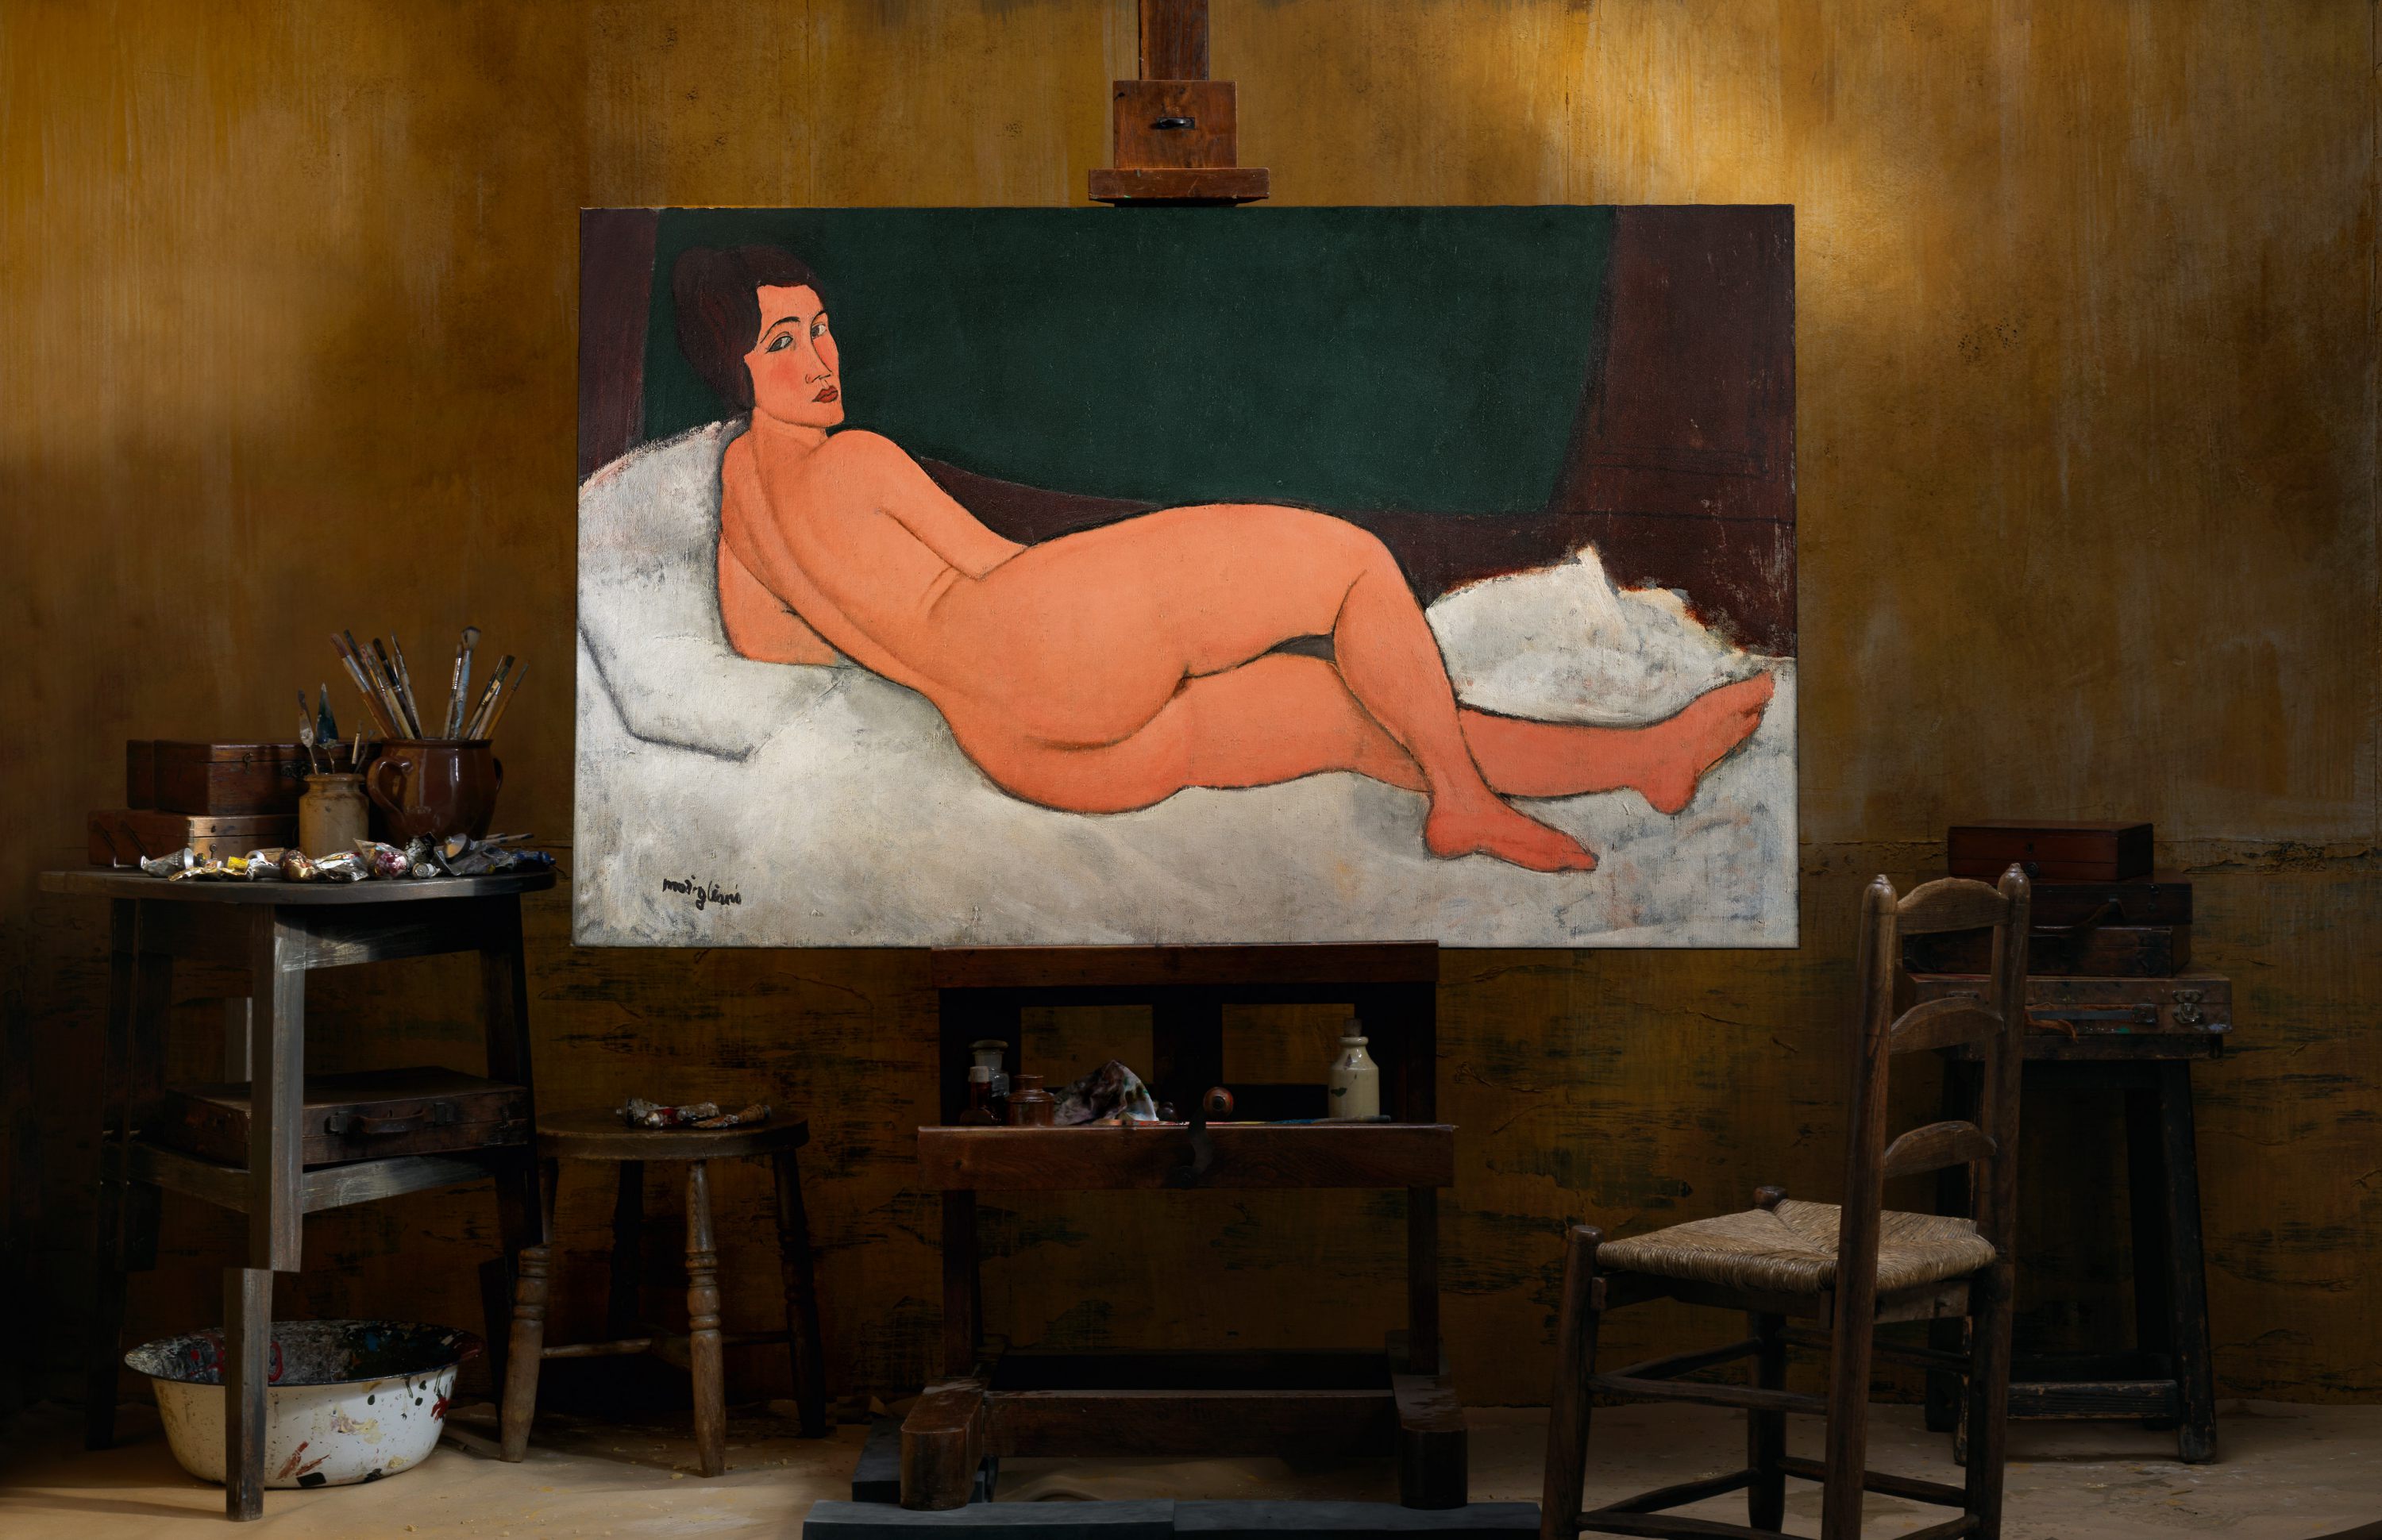 Sotheby’s sets record-breaking estimate with Modigliani’s once-banned nude painting